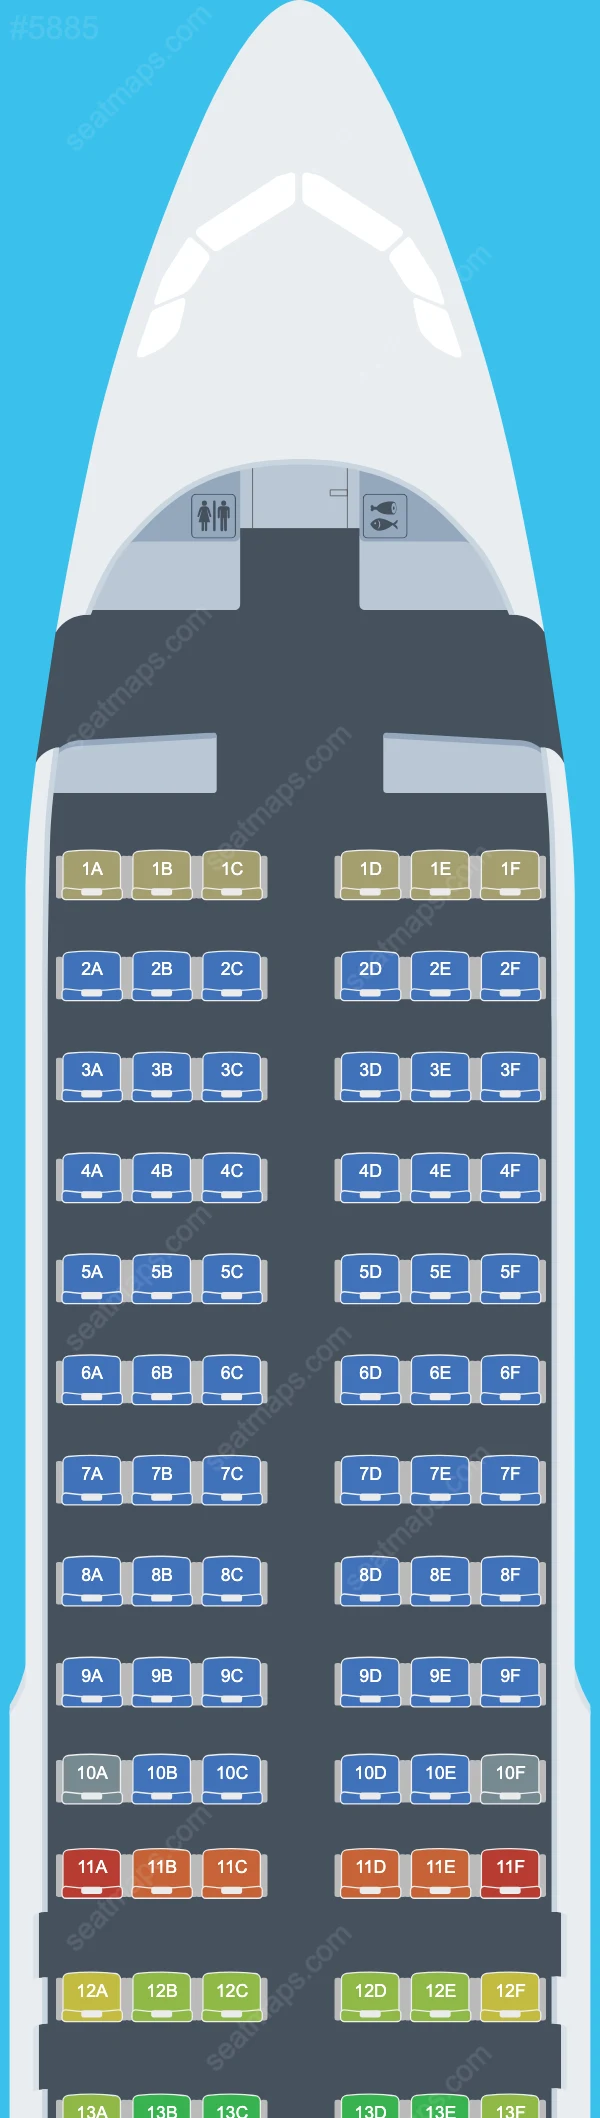 LATAM Airlines Brasil Airbus A320 Seat Maps A320-200neo V.1